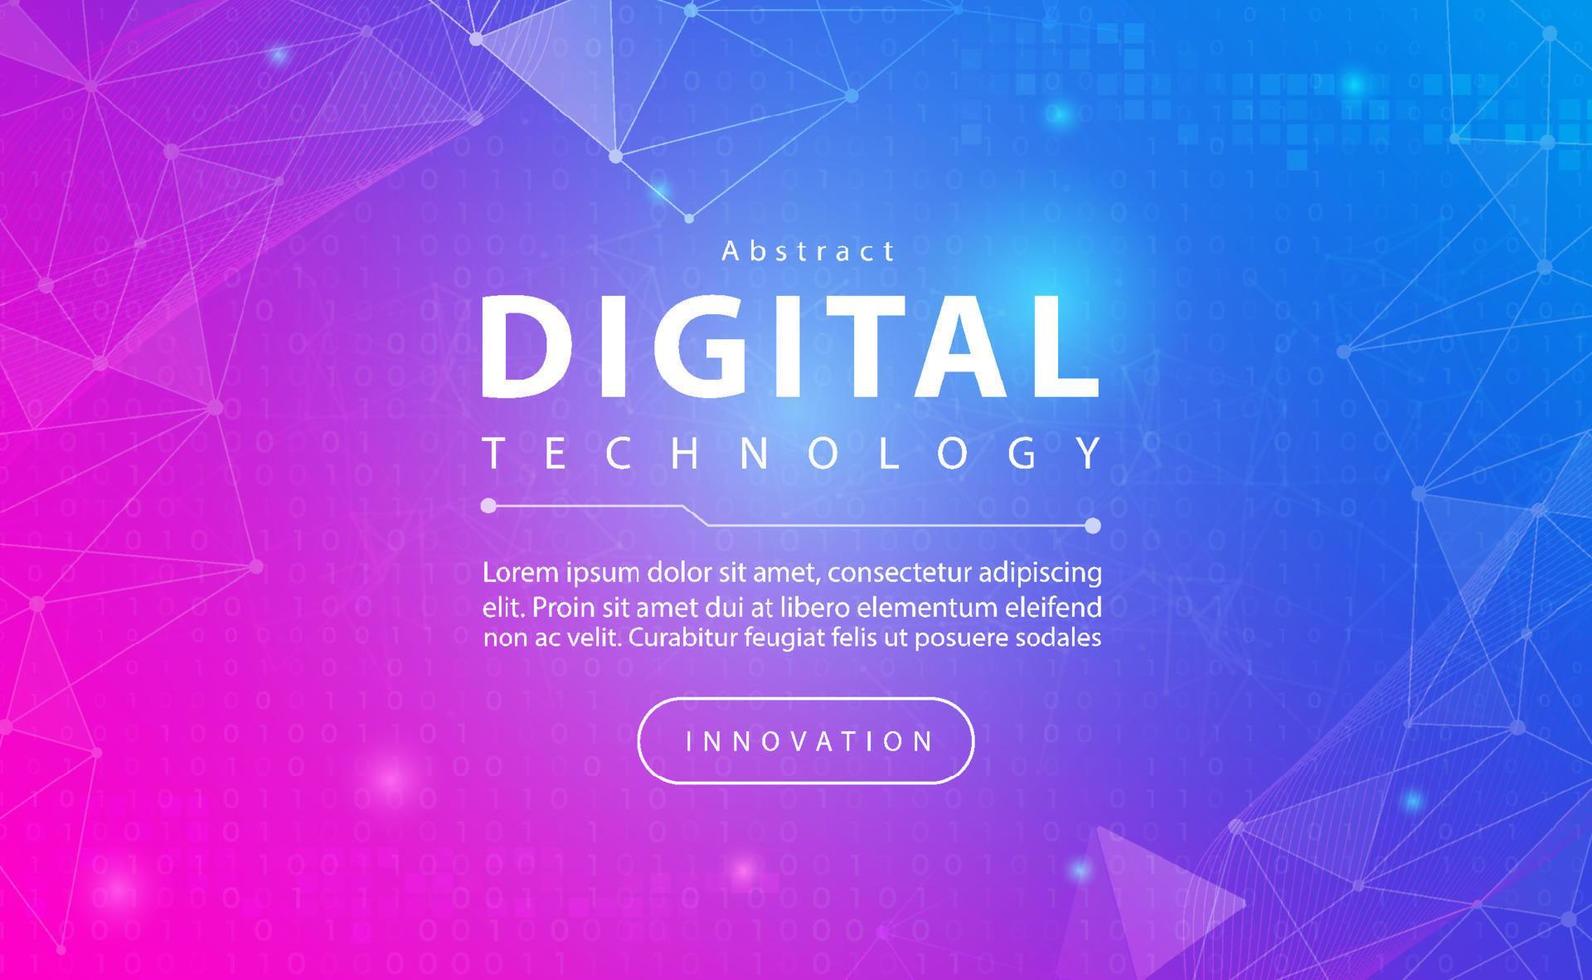 Digital technology banner pink blue background concept with technology line light effects, abstract tech, illustration vector for graphic design